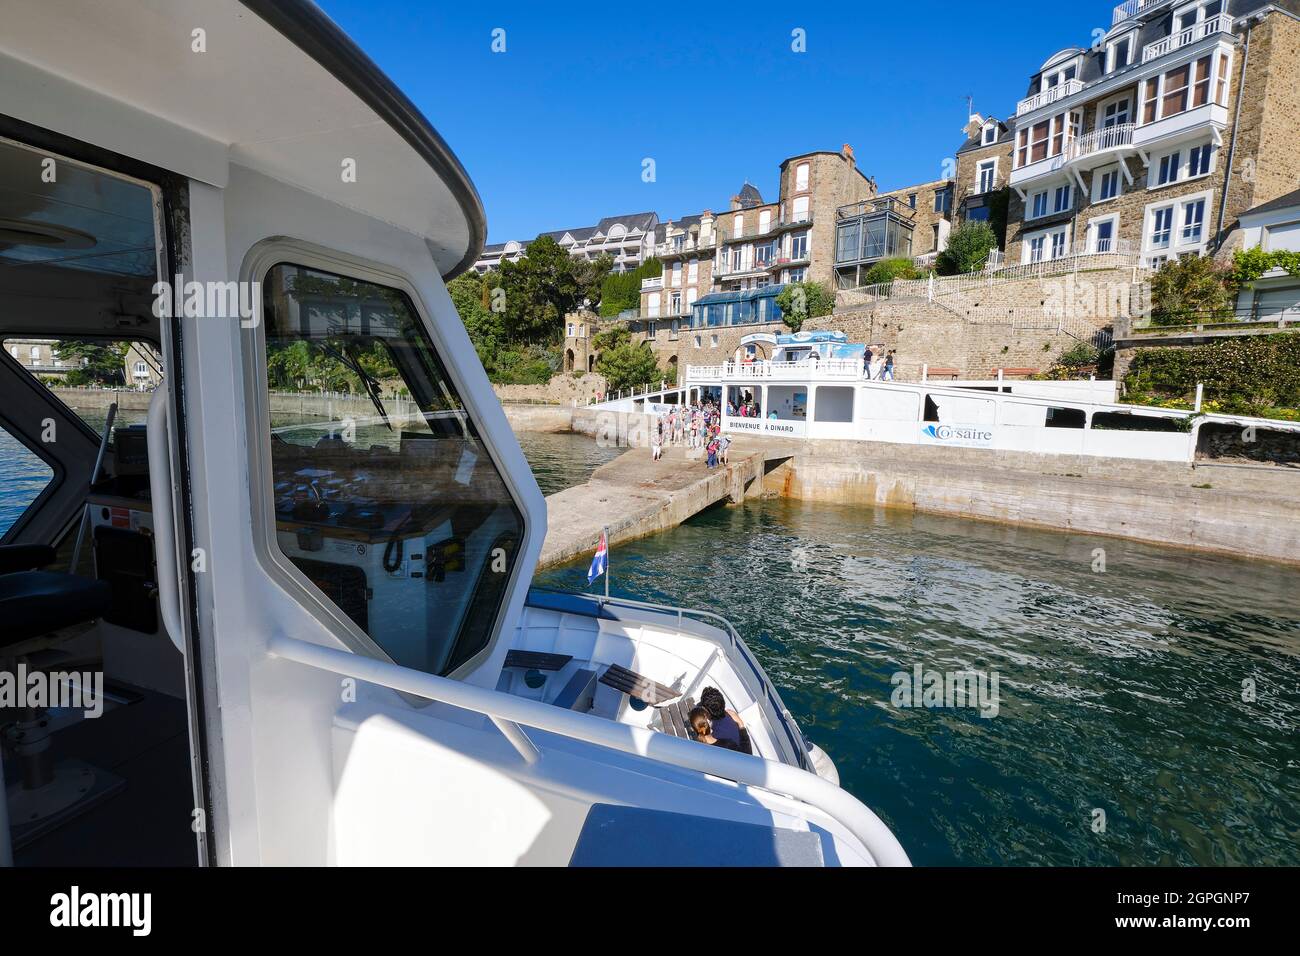 France, Ille et Vilaine, Cote d'Emeraude (Emerald Coast), Dinard, boarding of the boat that links Dinard and Saint-Malo Stock Photo